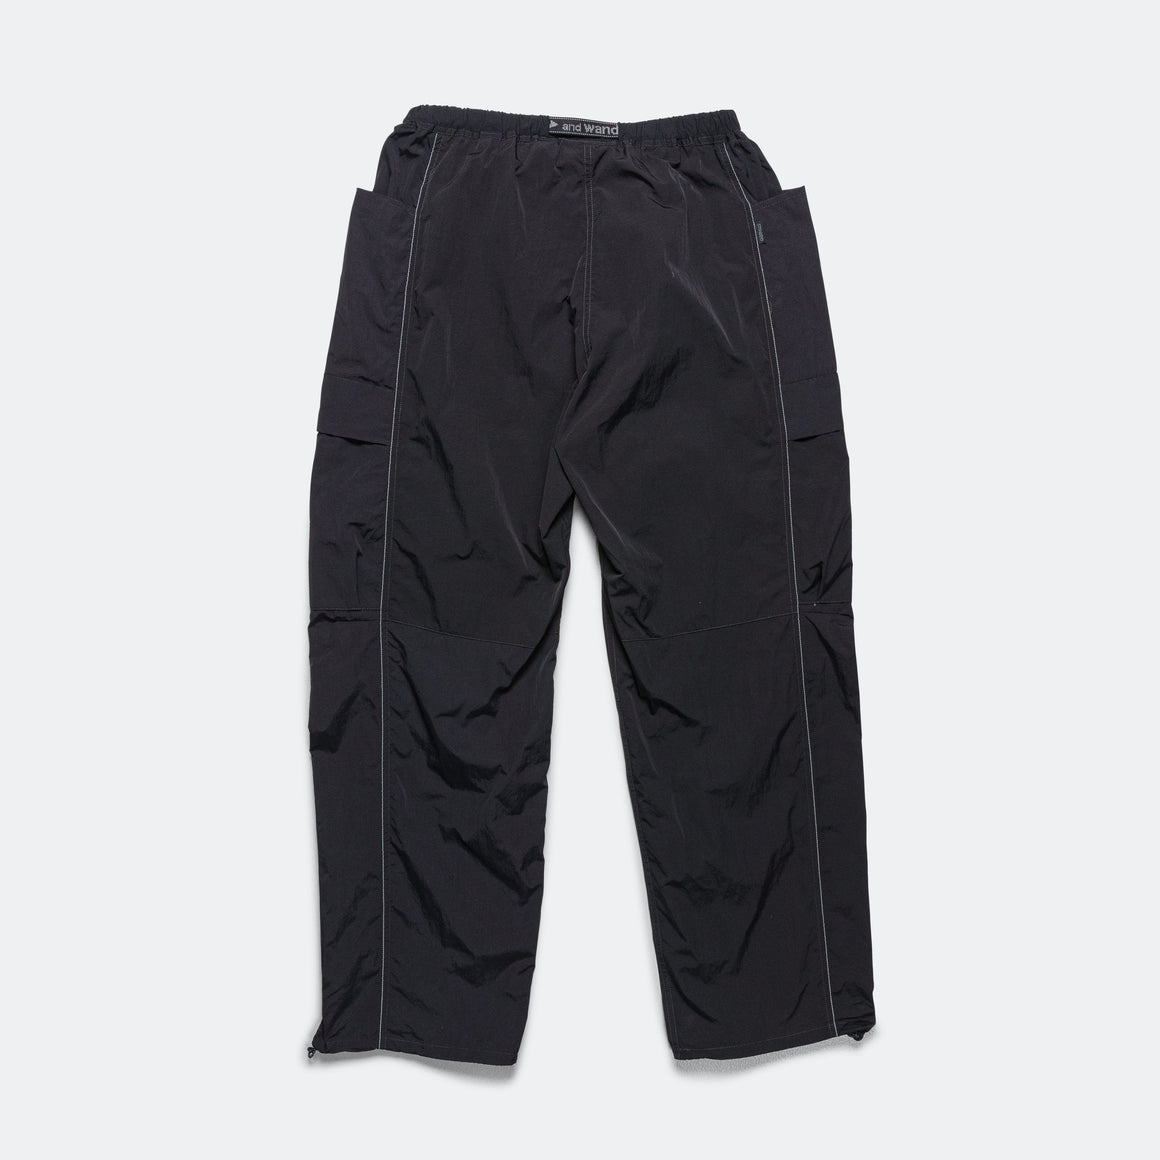 Patchwork Wind Pant × and wander - Black